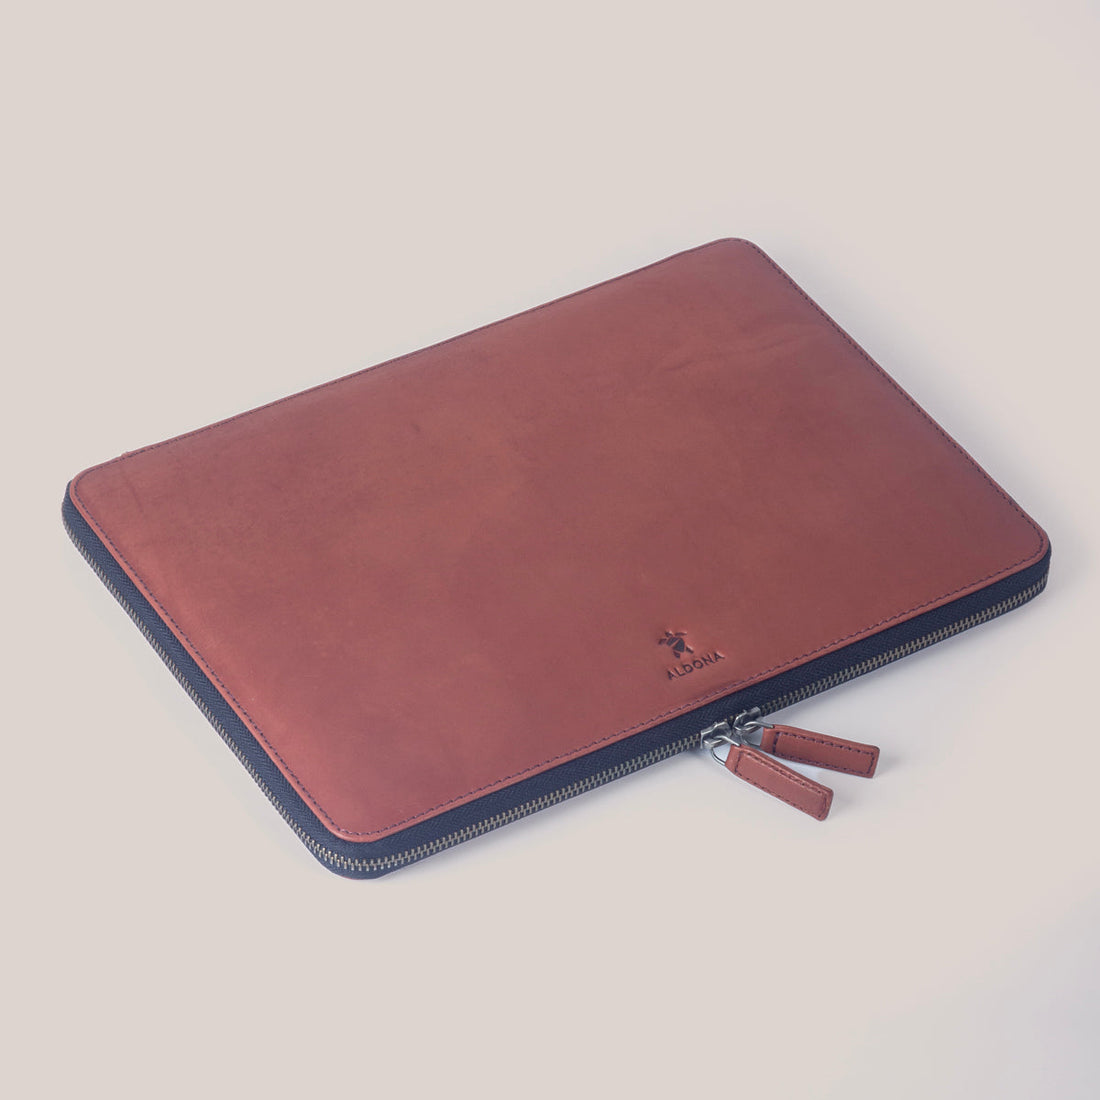 Microsoft Surface Book 13.5 Zippered Laptop Case - Burnt Tobacco